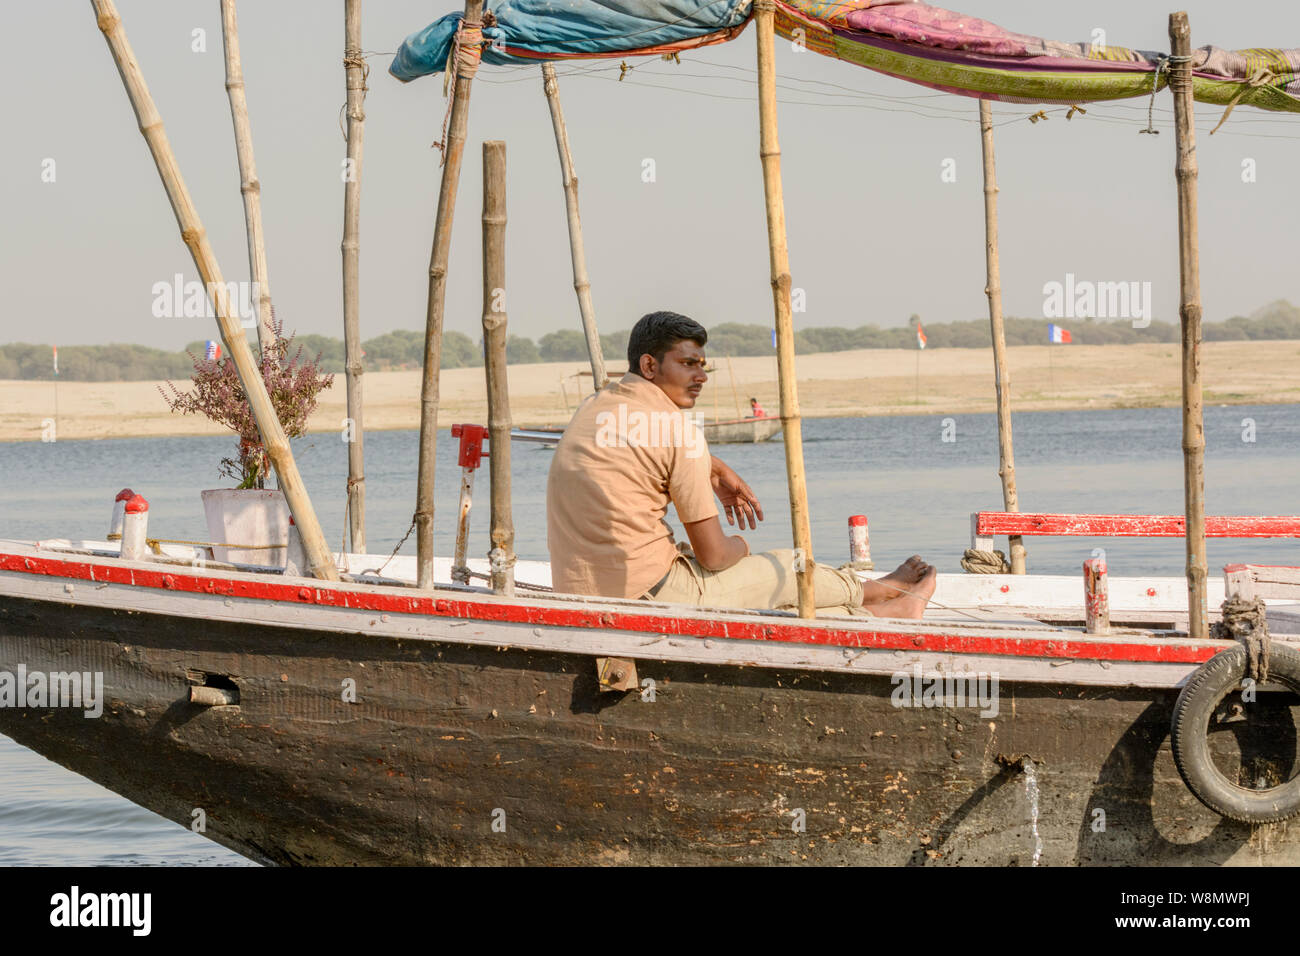 An Indian man sits on a wooden boat on the River Ganges in Varanasi, Uttar Pradesh, India, South Asia. Also known as Benares, Banaras and Kashi. Stock Photo